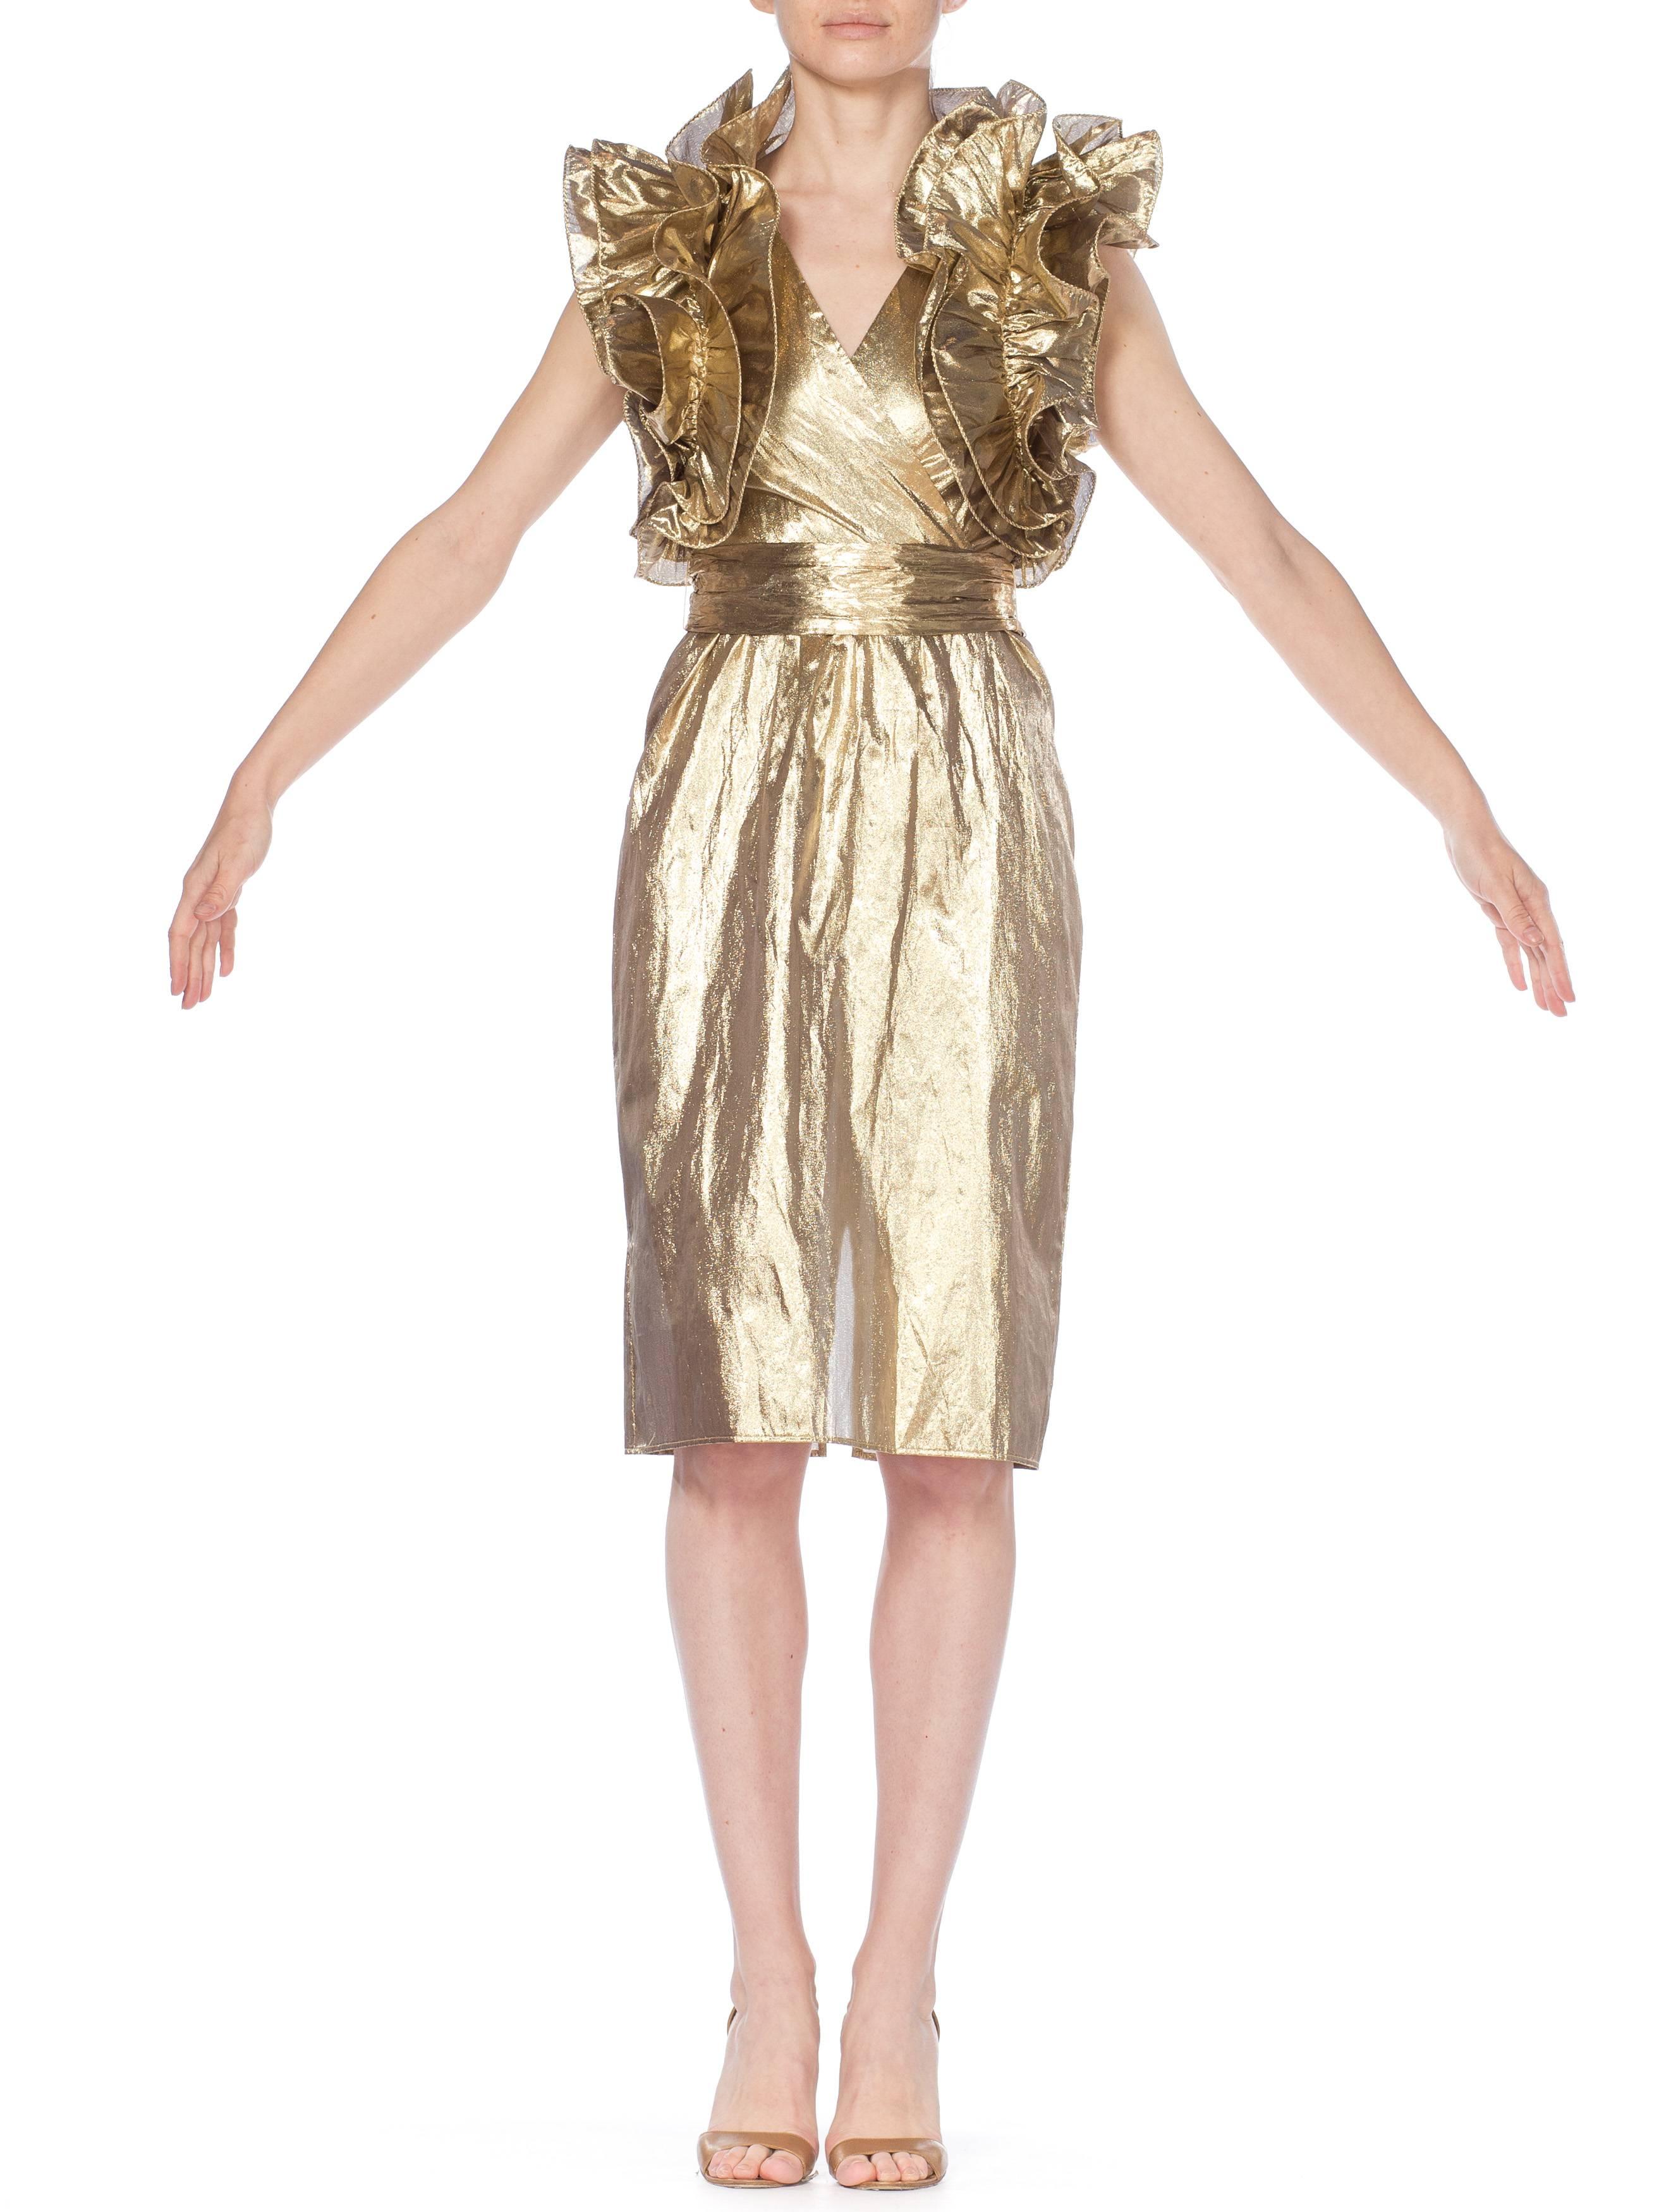 Fab Gold Lamé Gucci Style Ruffled 1980s Party Dress 9